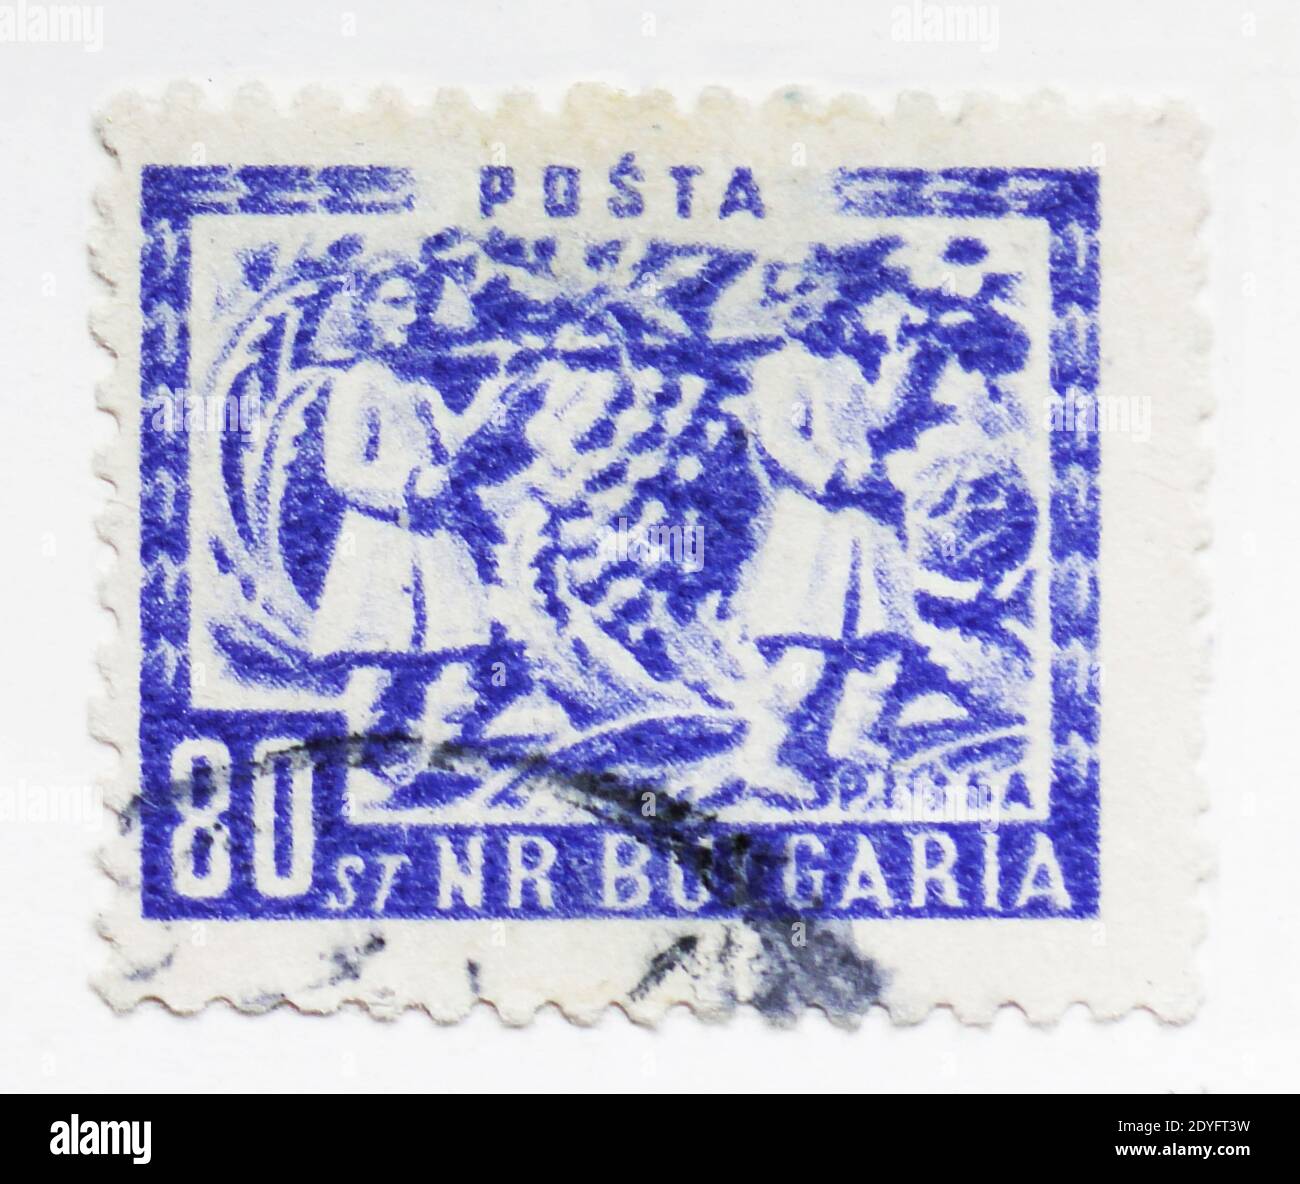 MOSCOW, RUSSIA - JULY 15, 2019: Postage stamp printed in Bulgaria shows Scout from the Creek of Eshcol, Relief from the Church in Pa, serie, circa 195 Stock Photo